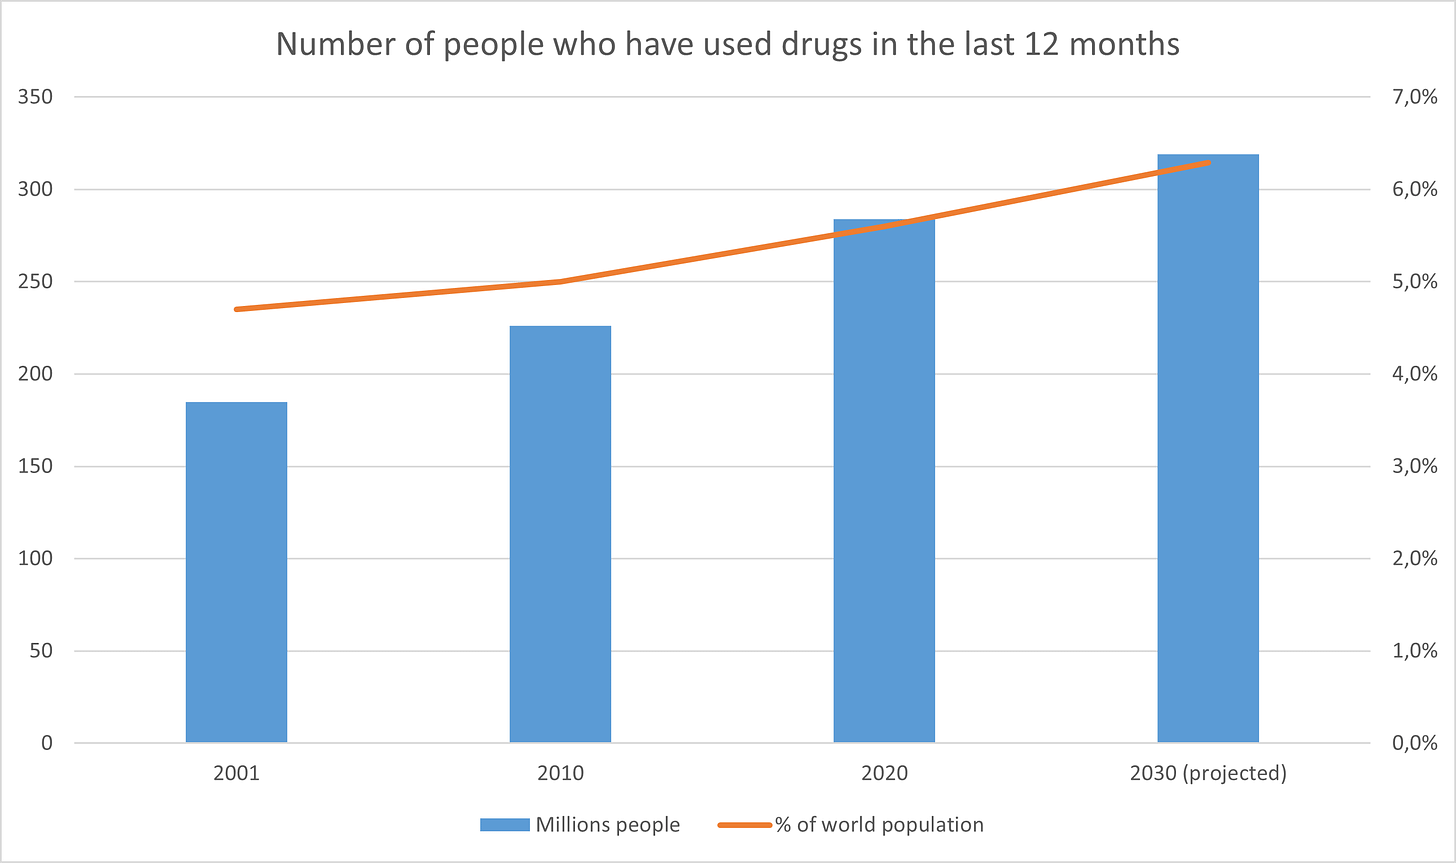 Number of people who have used drugs in the last 12 months